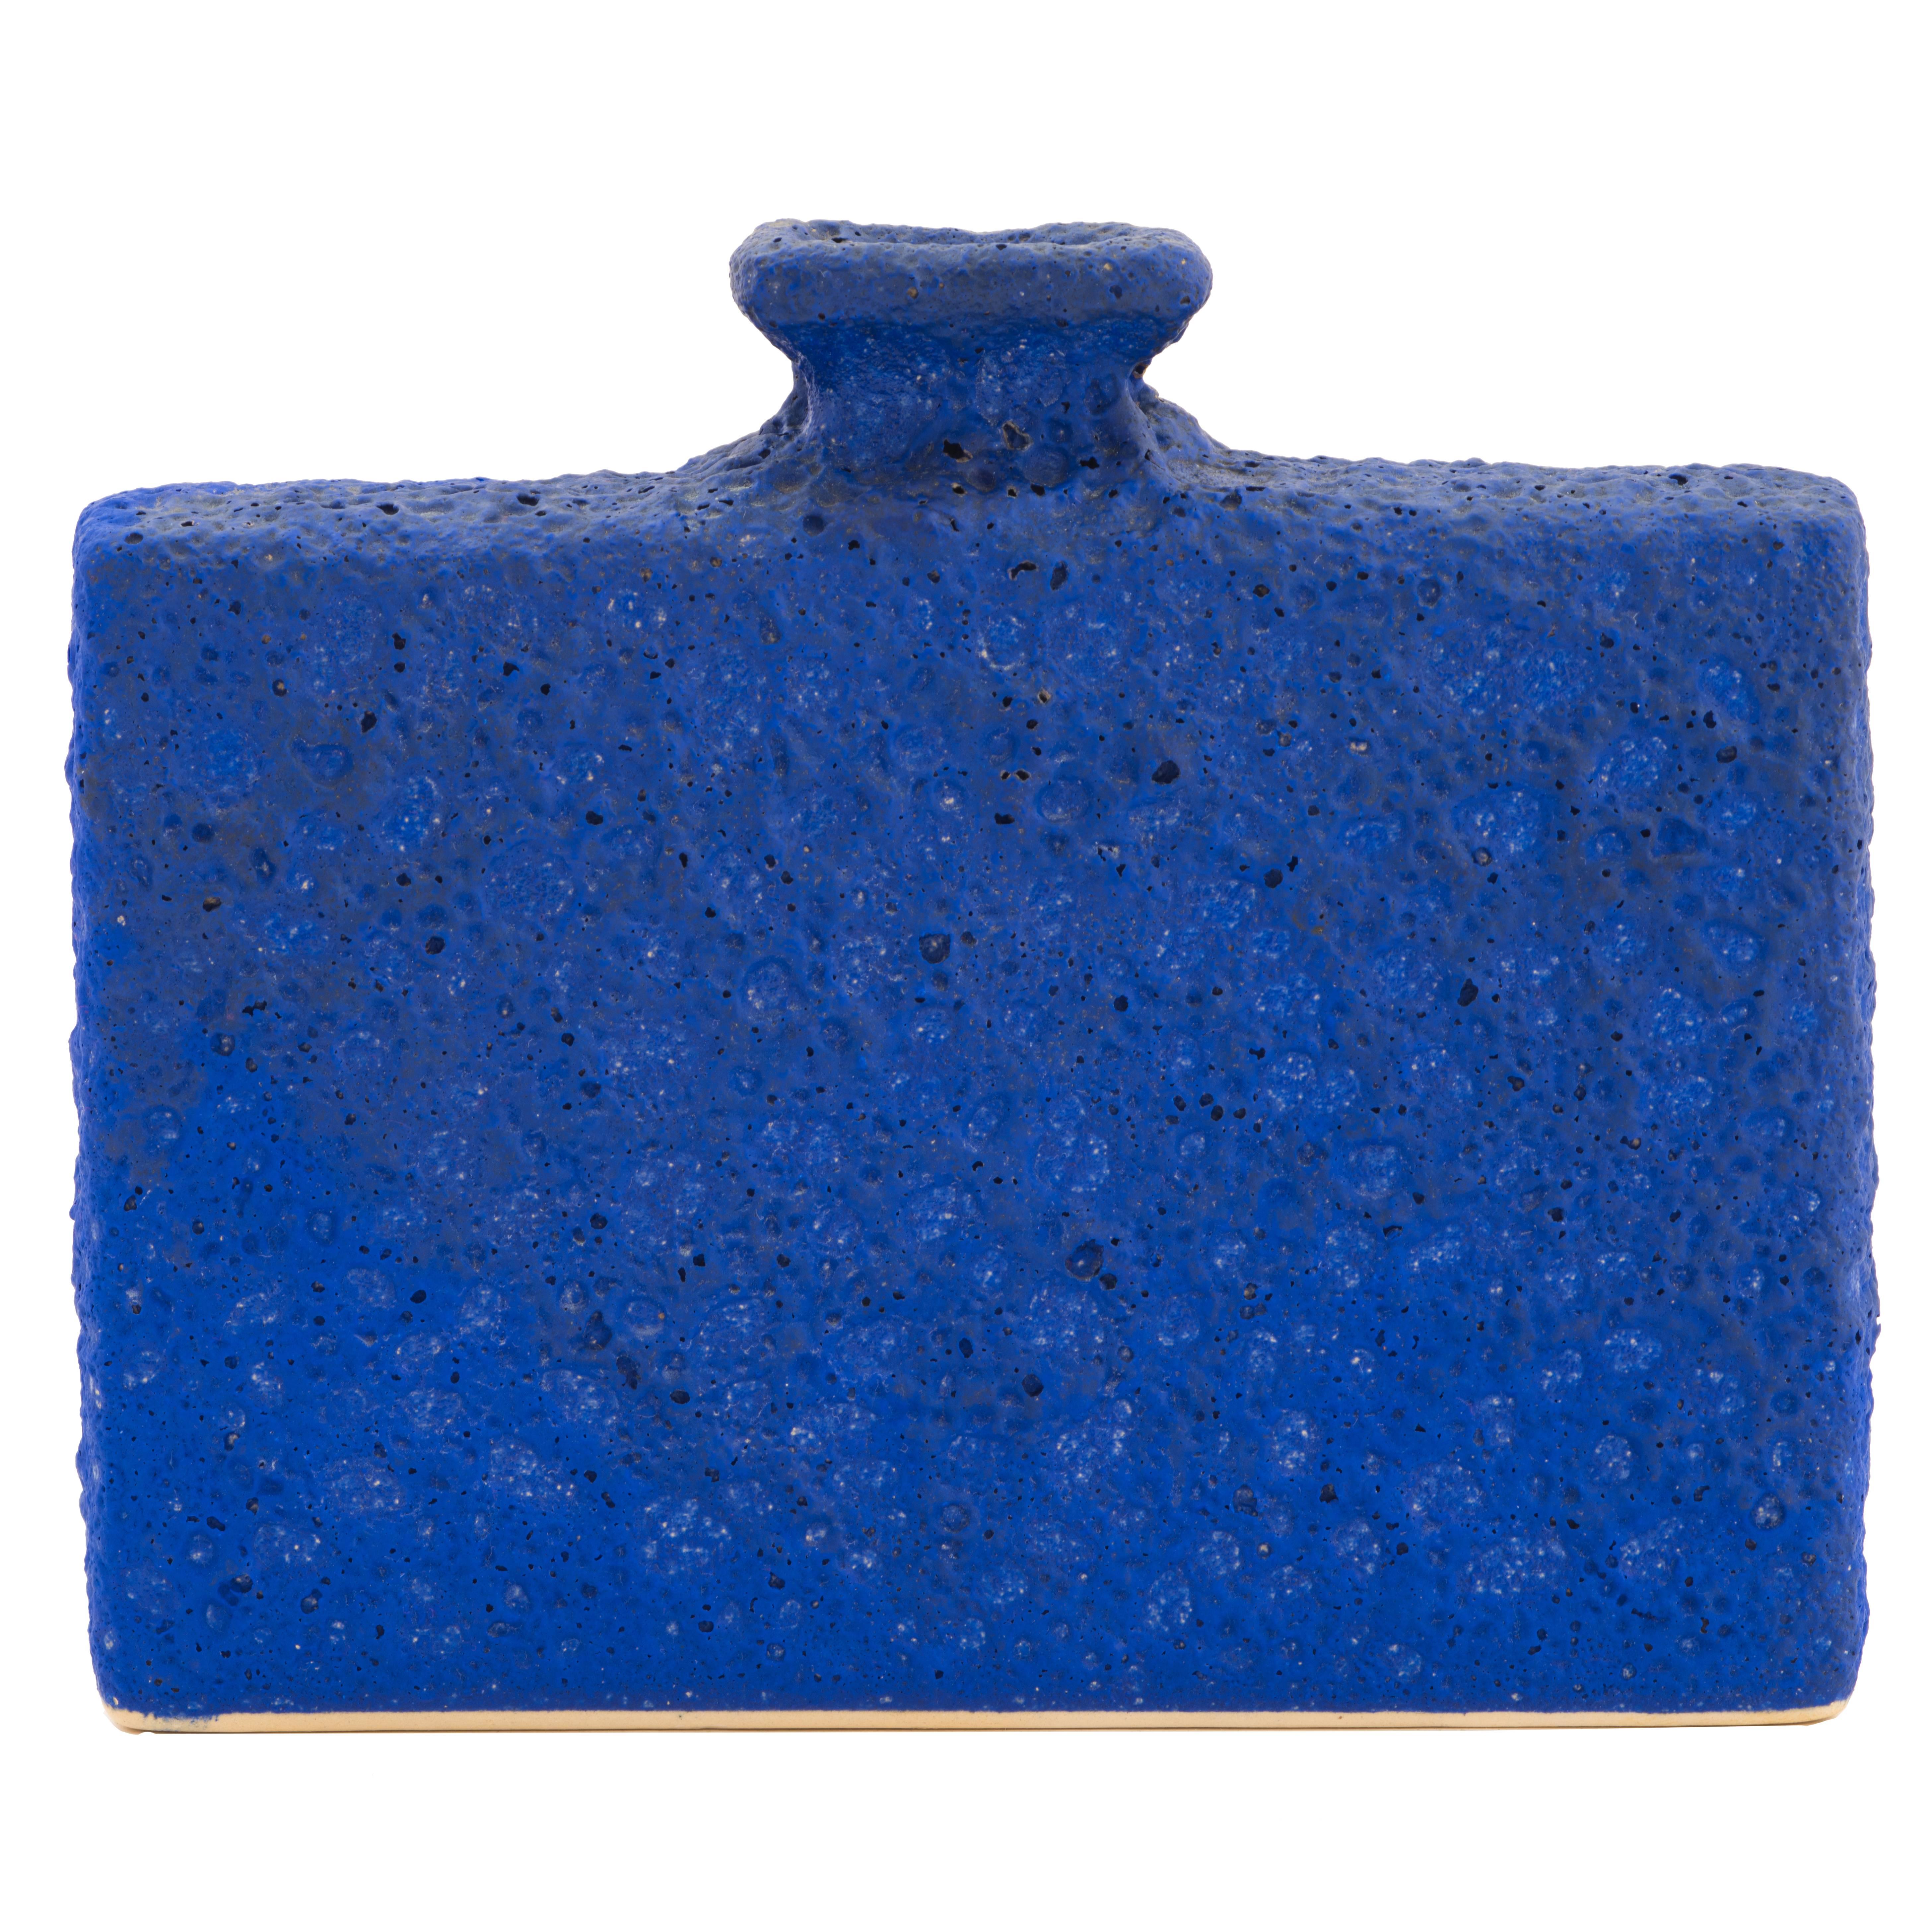 1960s West German Volcanic Glaze Vase as Tribute to Yves Klein